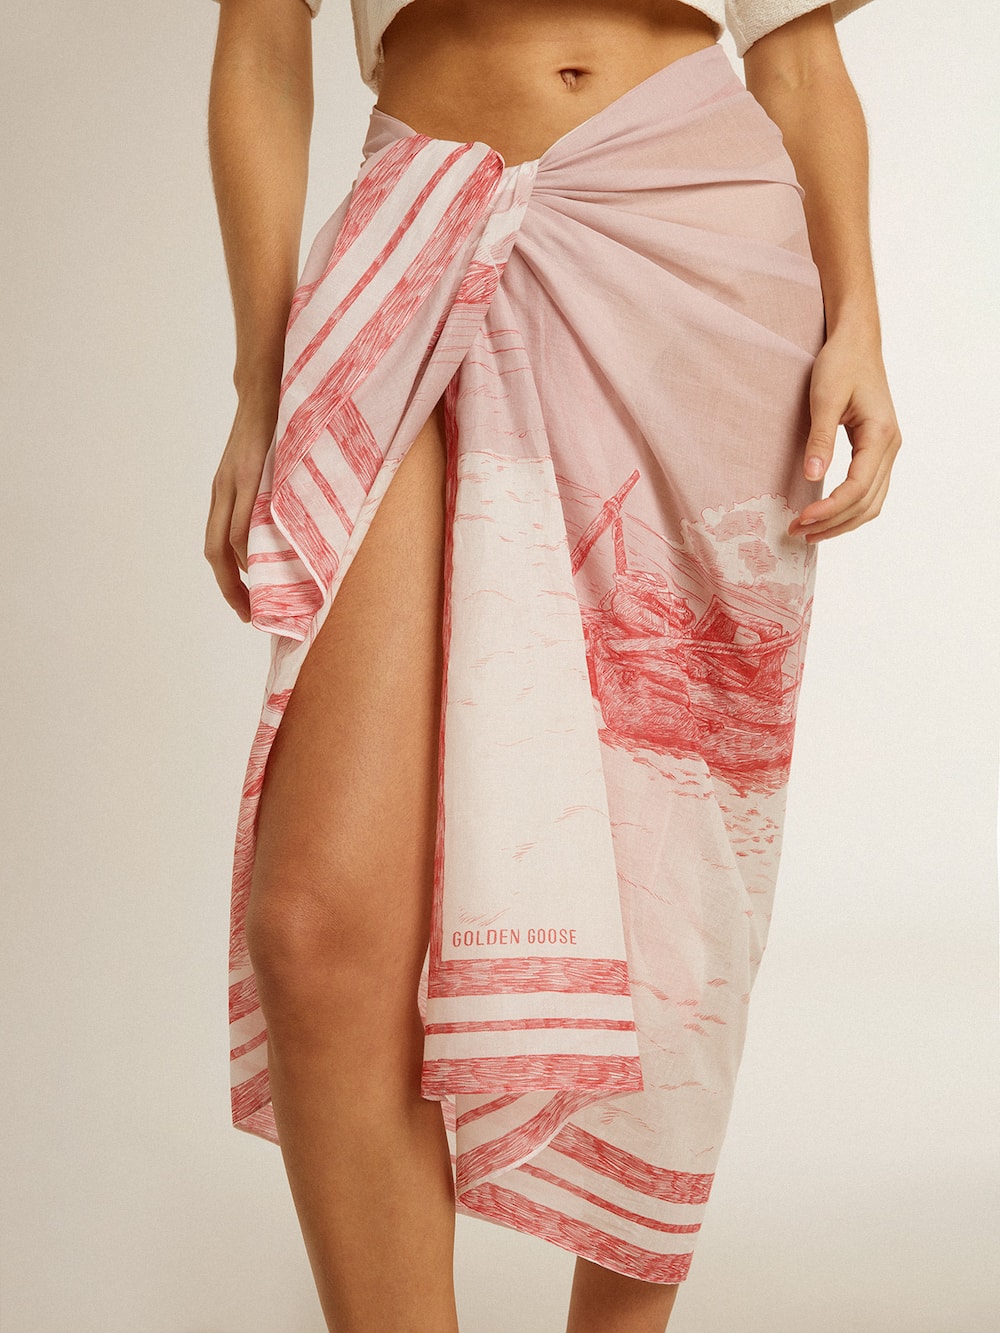 Golden Goose - Sarong in cotton voile with all-over cream and red print in 